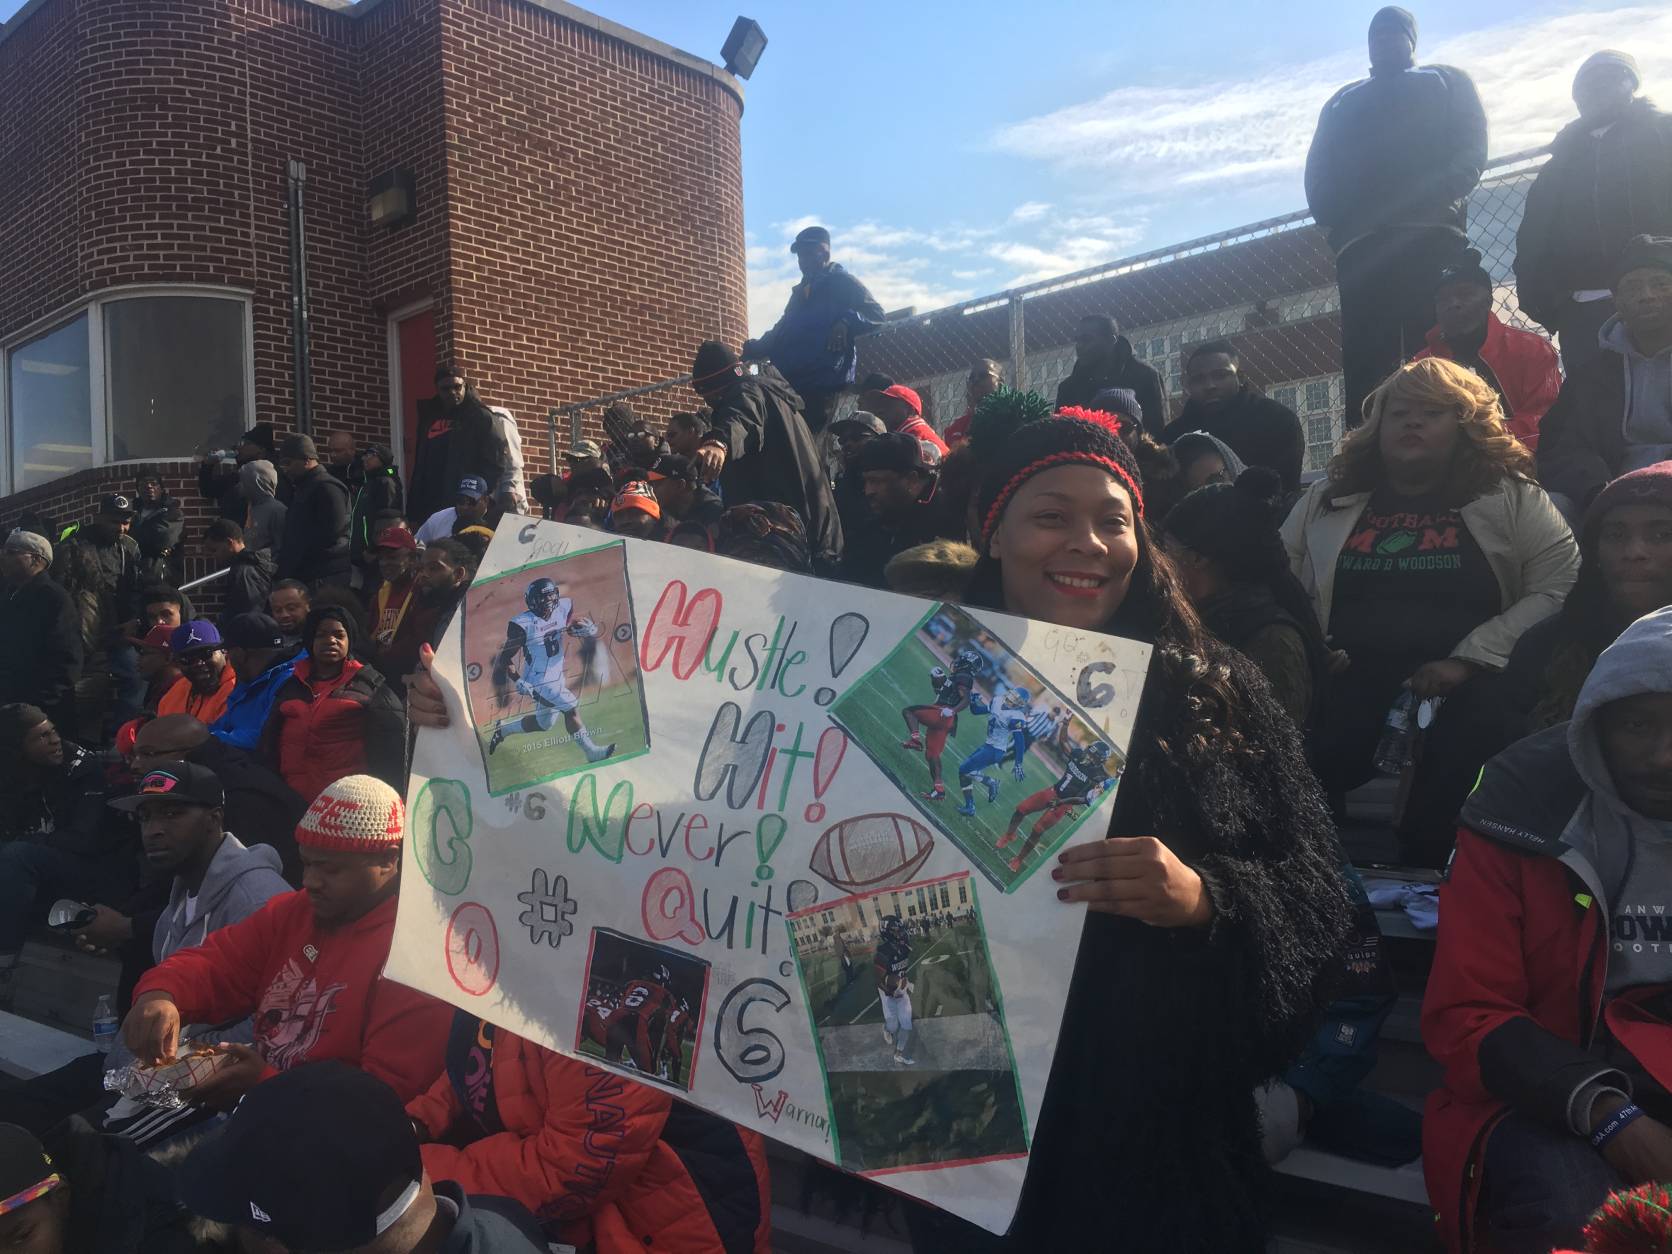 A fan shows a sign at the Turkey Bowl on Thursday, Nov. 24, 2016. (WTOP/Mike Murillo)